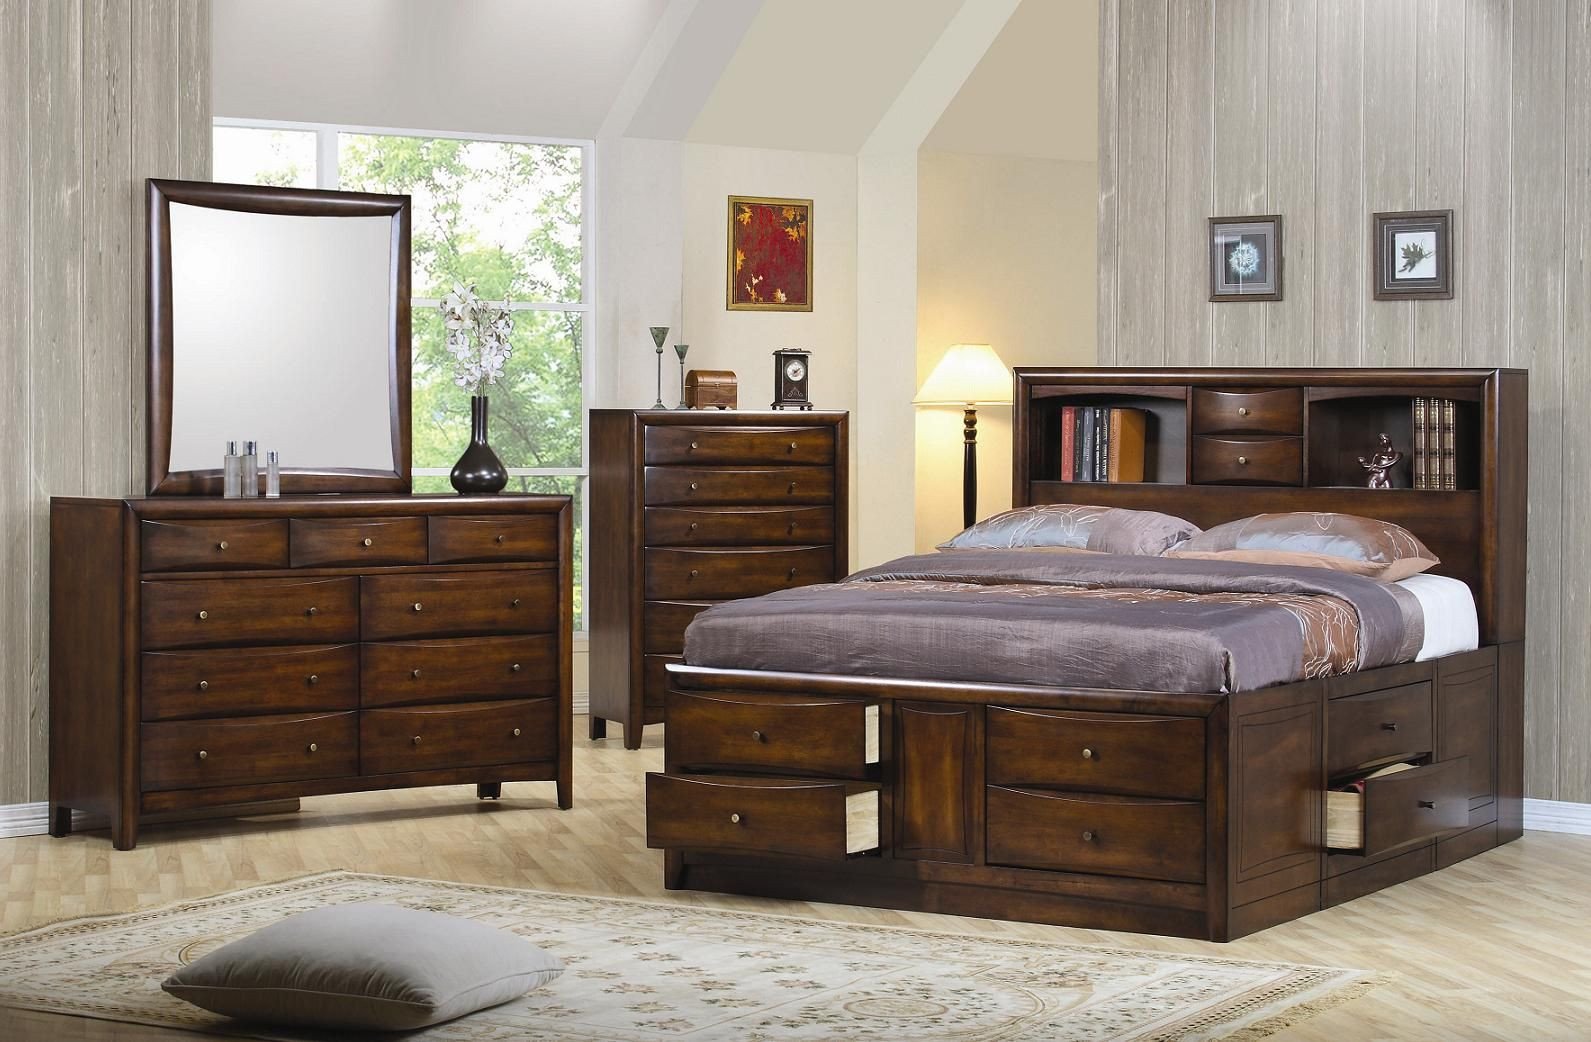 Platform Bedroom Set Queen Lovely Pin On My Style